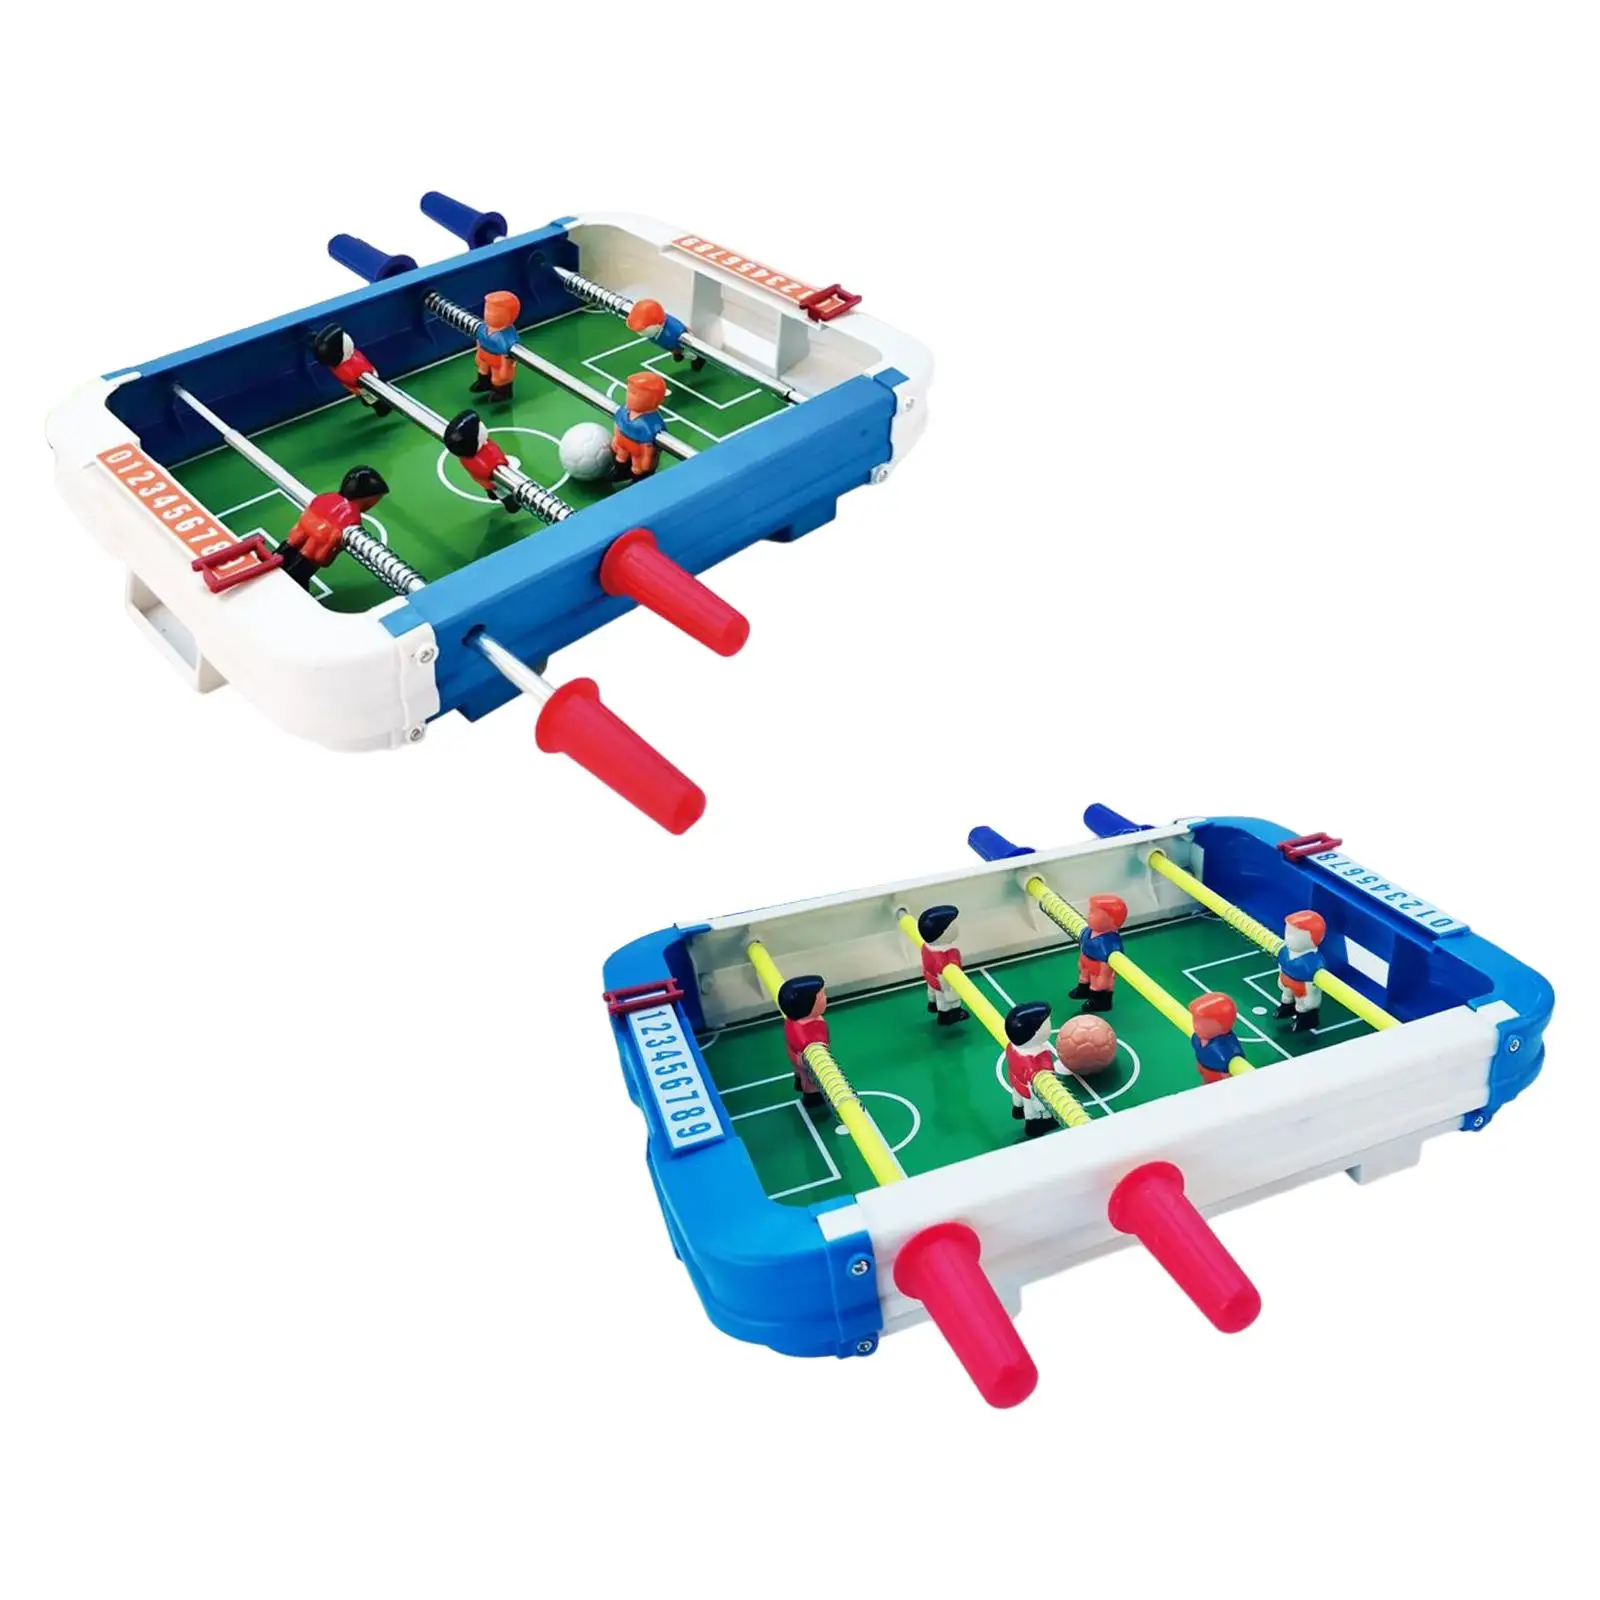 Mini Foosball Table, Desktop Football Board Games Entertainment Table Top Soccer Game for Parent Child Interaction Family Night